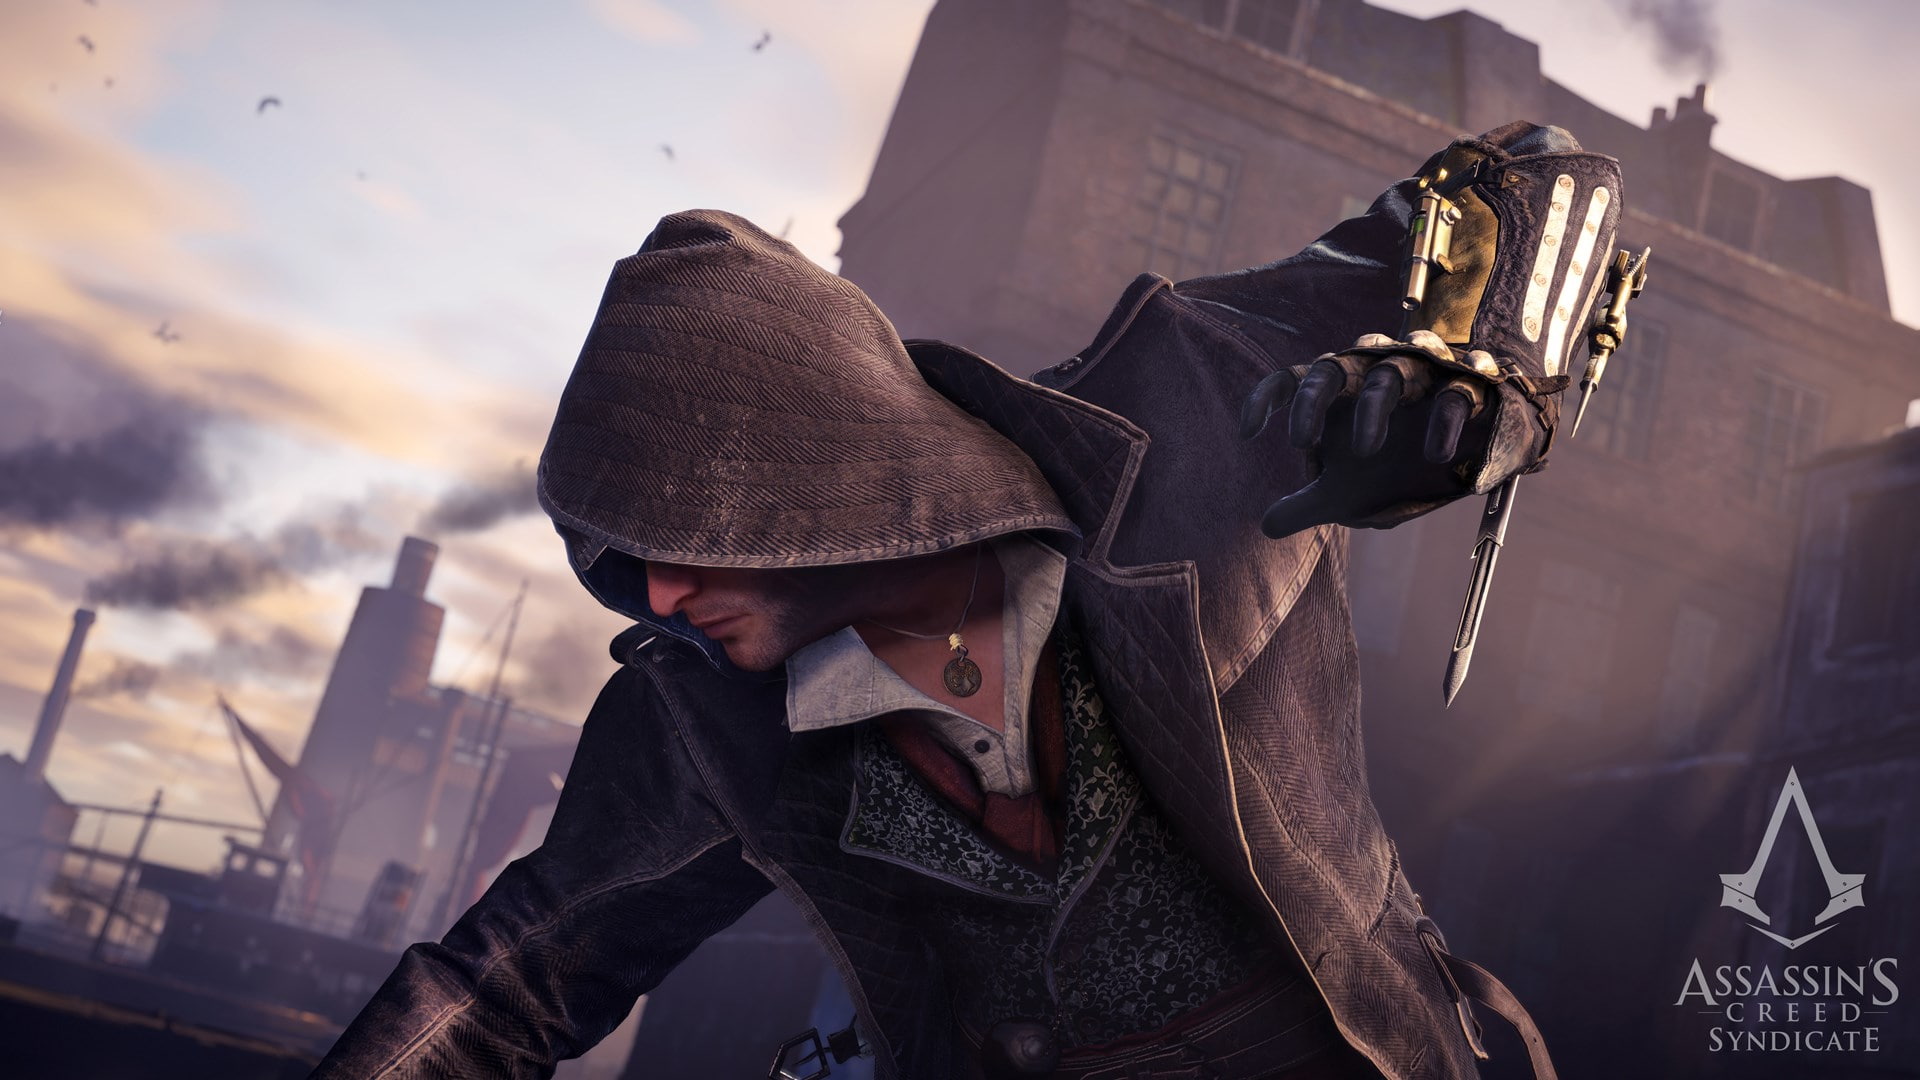 assassins creed syndicate, clothing, one person, weapon, sky